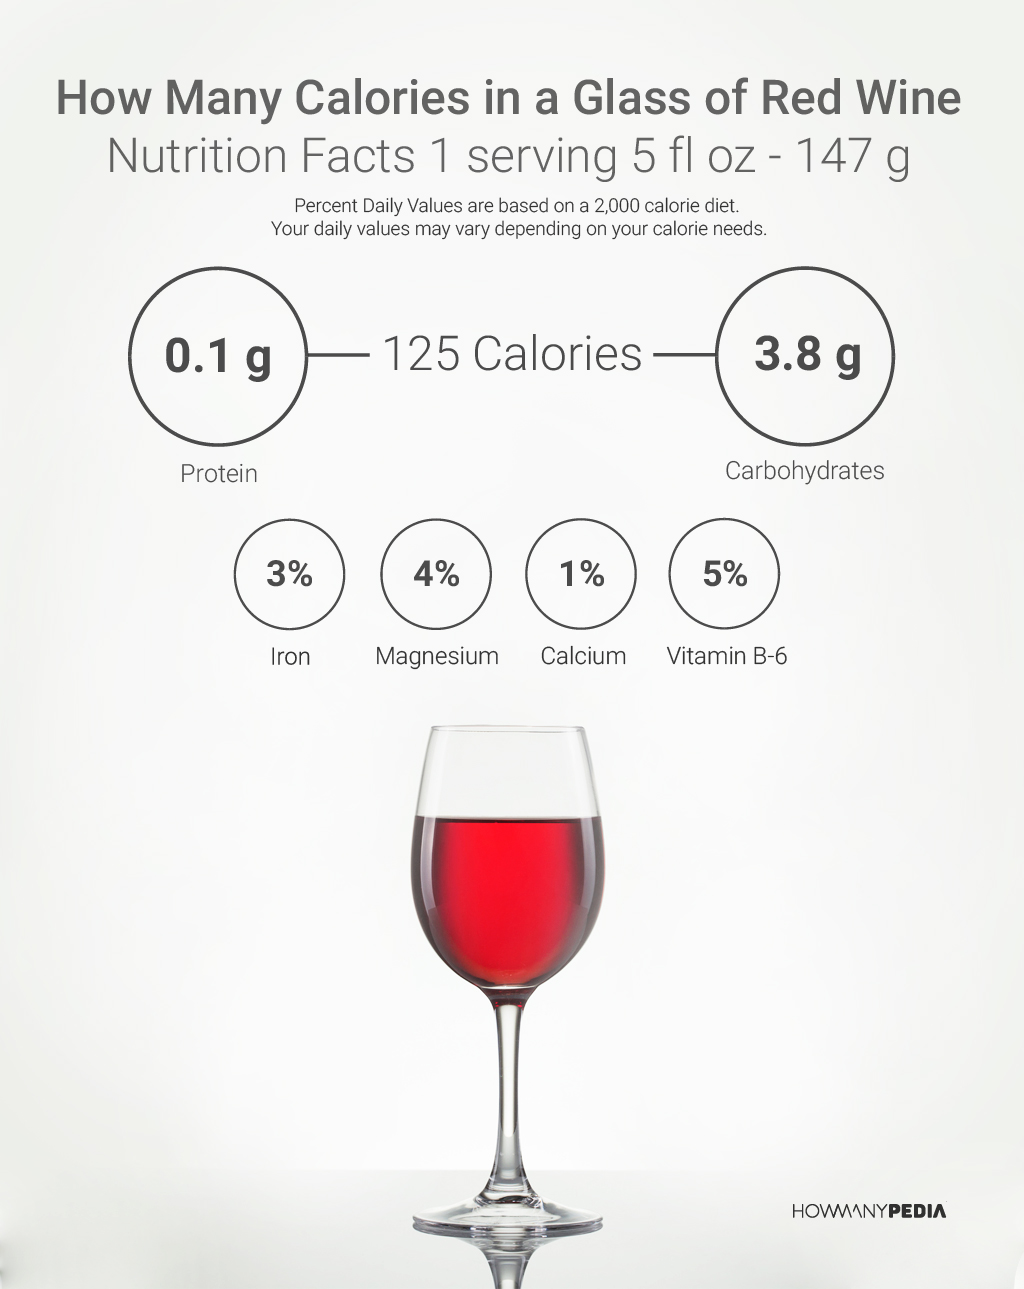 How Many Calories in a Glass of Red Wine Nutrition Facts